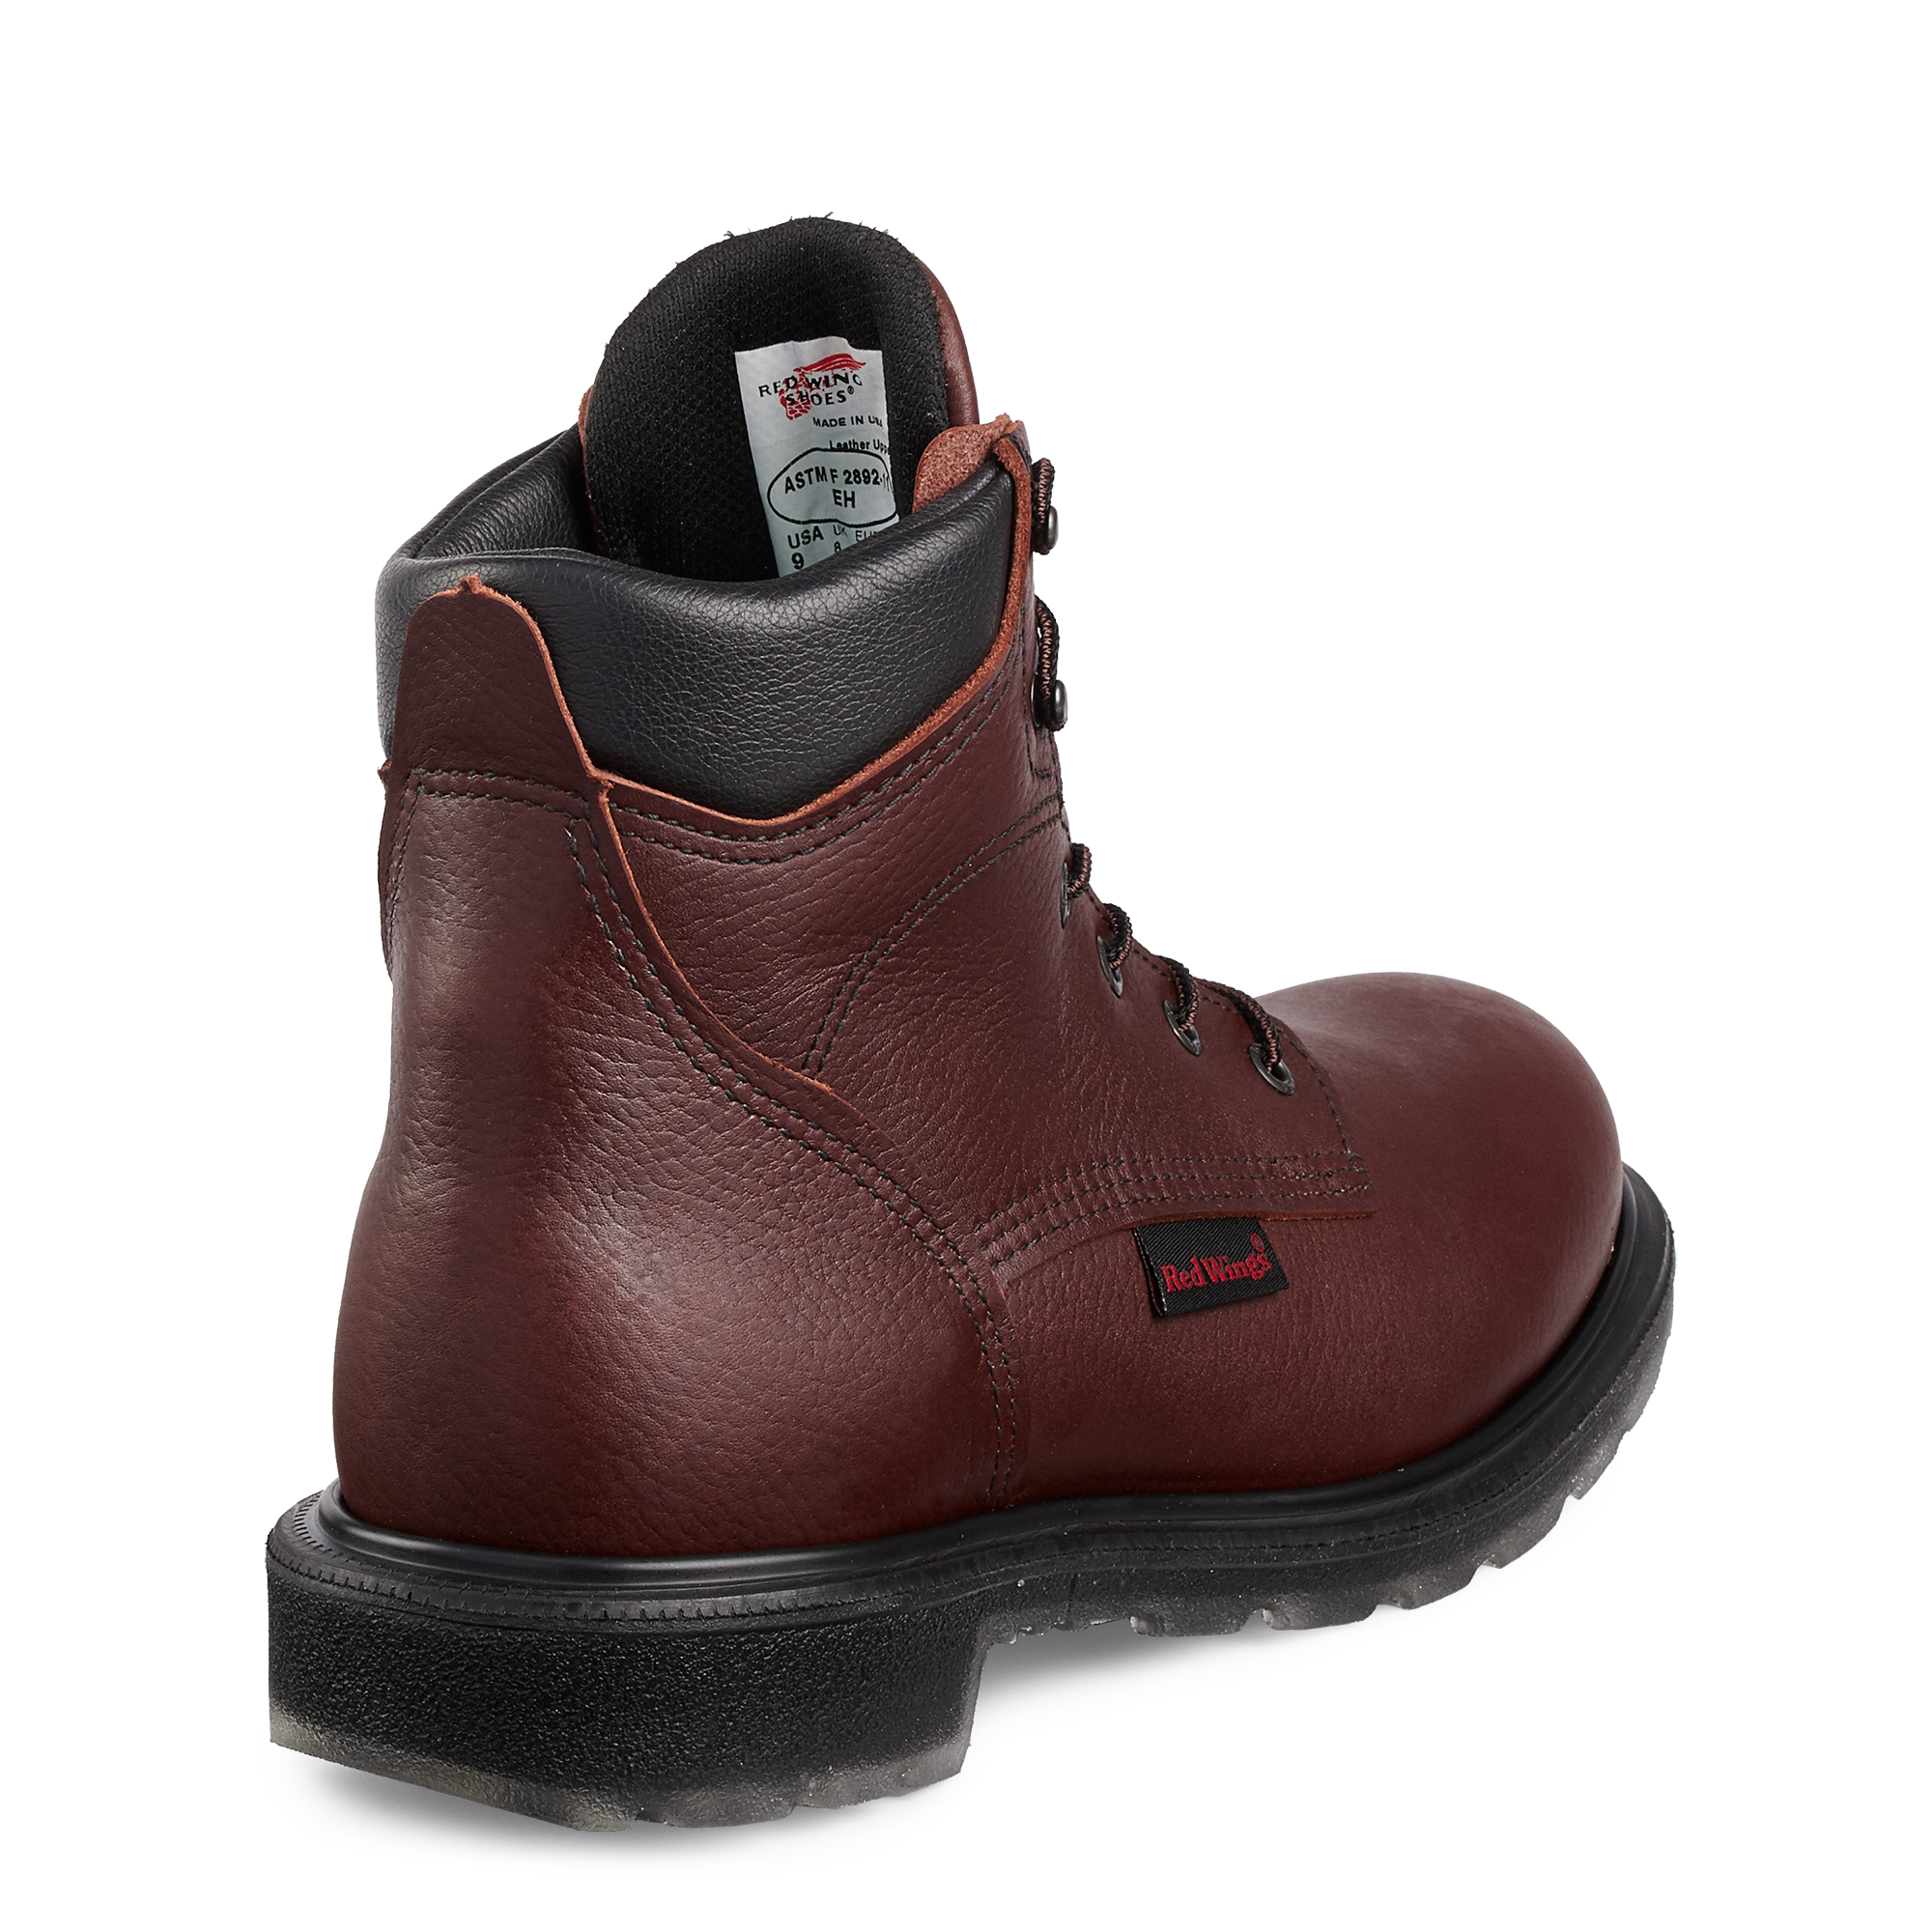 sacred good looking carpet 2406, Red Wing 2406, 2406 Safety Toe Boots, 2406 Work Boots – Baker Shoes